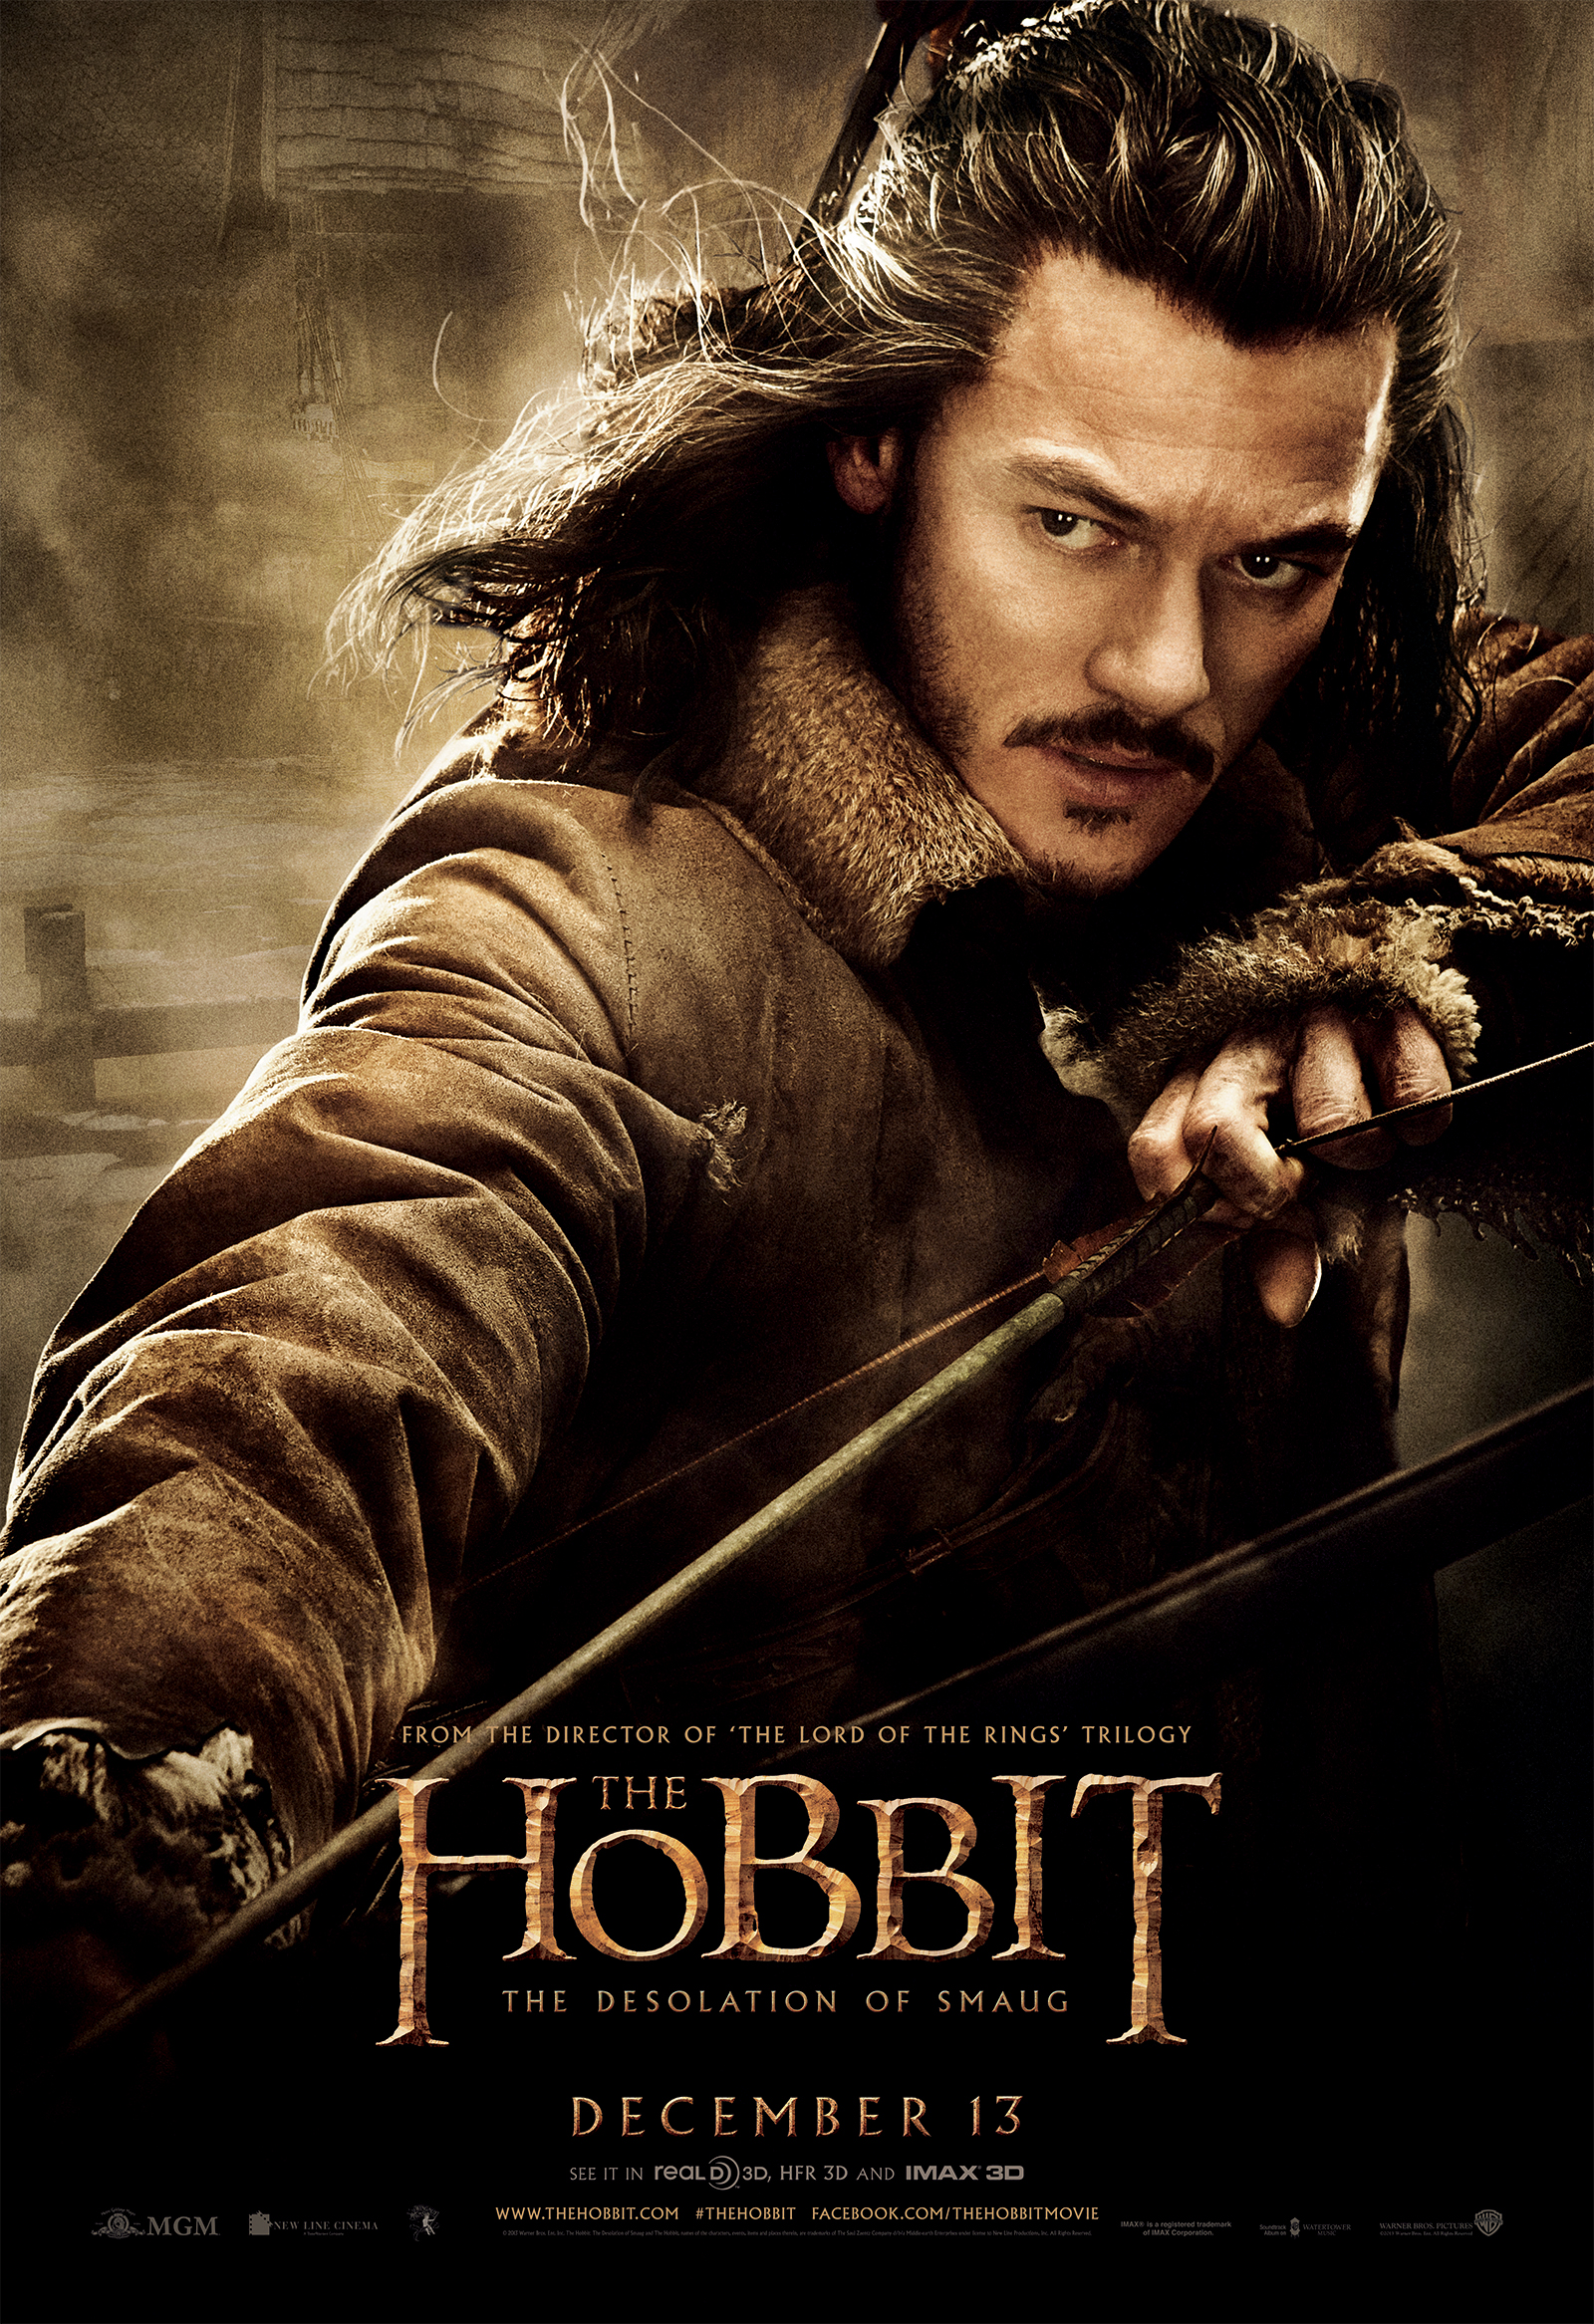 ‘The Hobbit: The Desolation of Smaug’ Character Posters